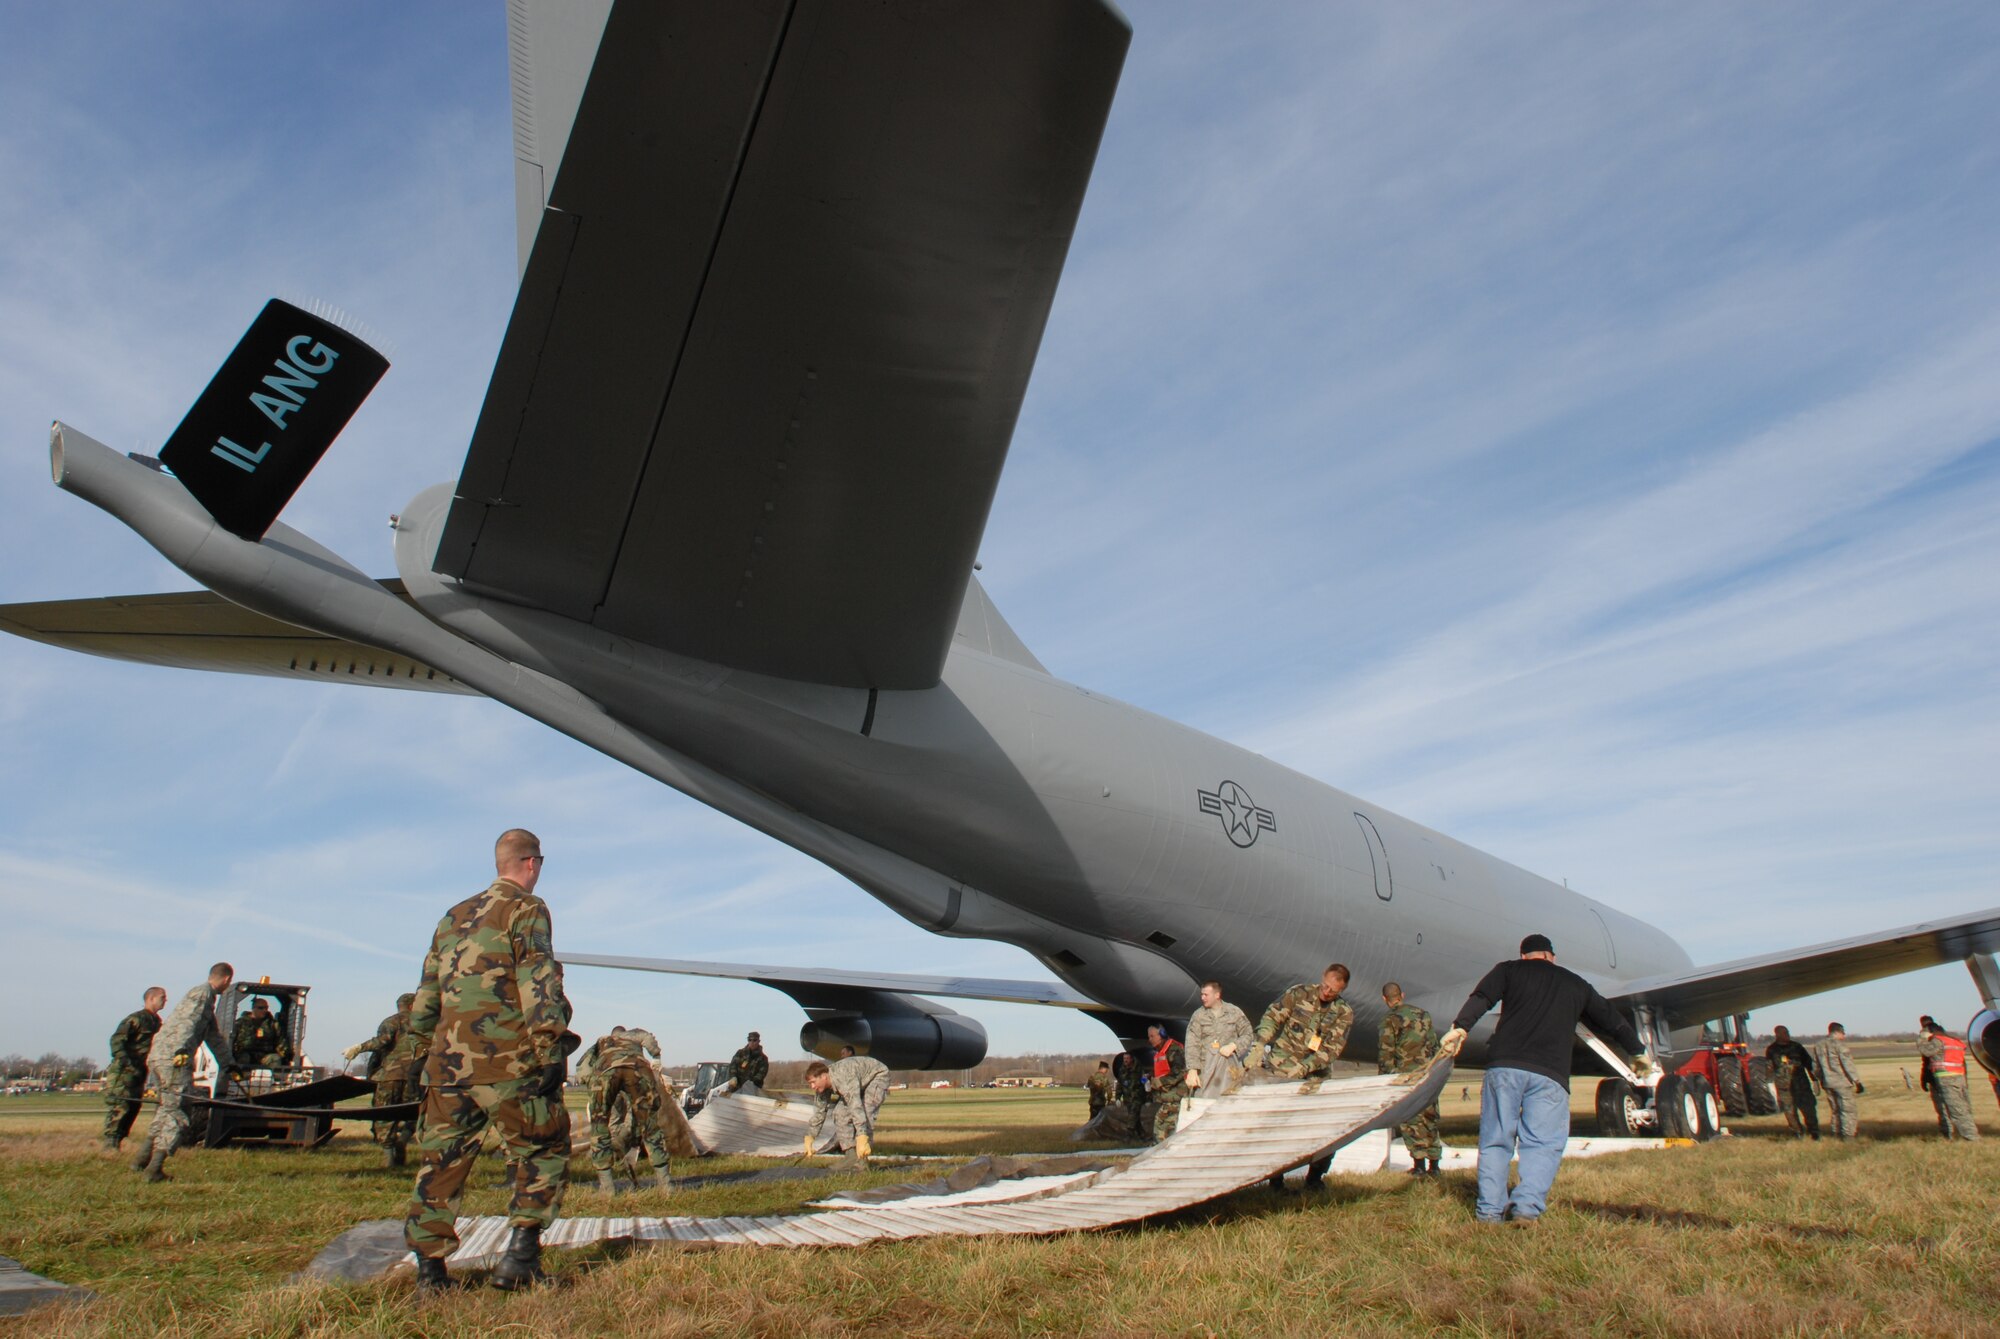 Members of the 126th Air Refueling Wing, 375th Airlift Wing and 182nd Airlift Wing work together to lay Mobi-Mats as a pathway for the movement of the last remaining KC-135E Stratotanker assigned to Scott Air Force Base, Illinois.  The aircraft will find its new, permanent home at Scott Field Heritage Park for the local community to enjoy.  (U.S. Air Force photo by Staff Sergeant Jessica Briney)